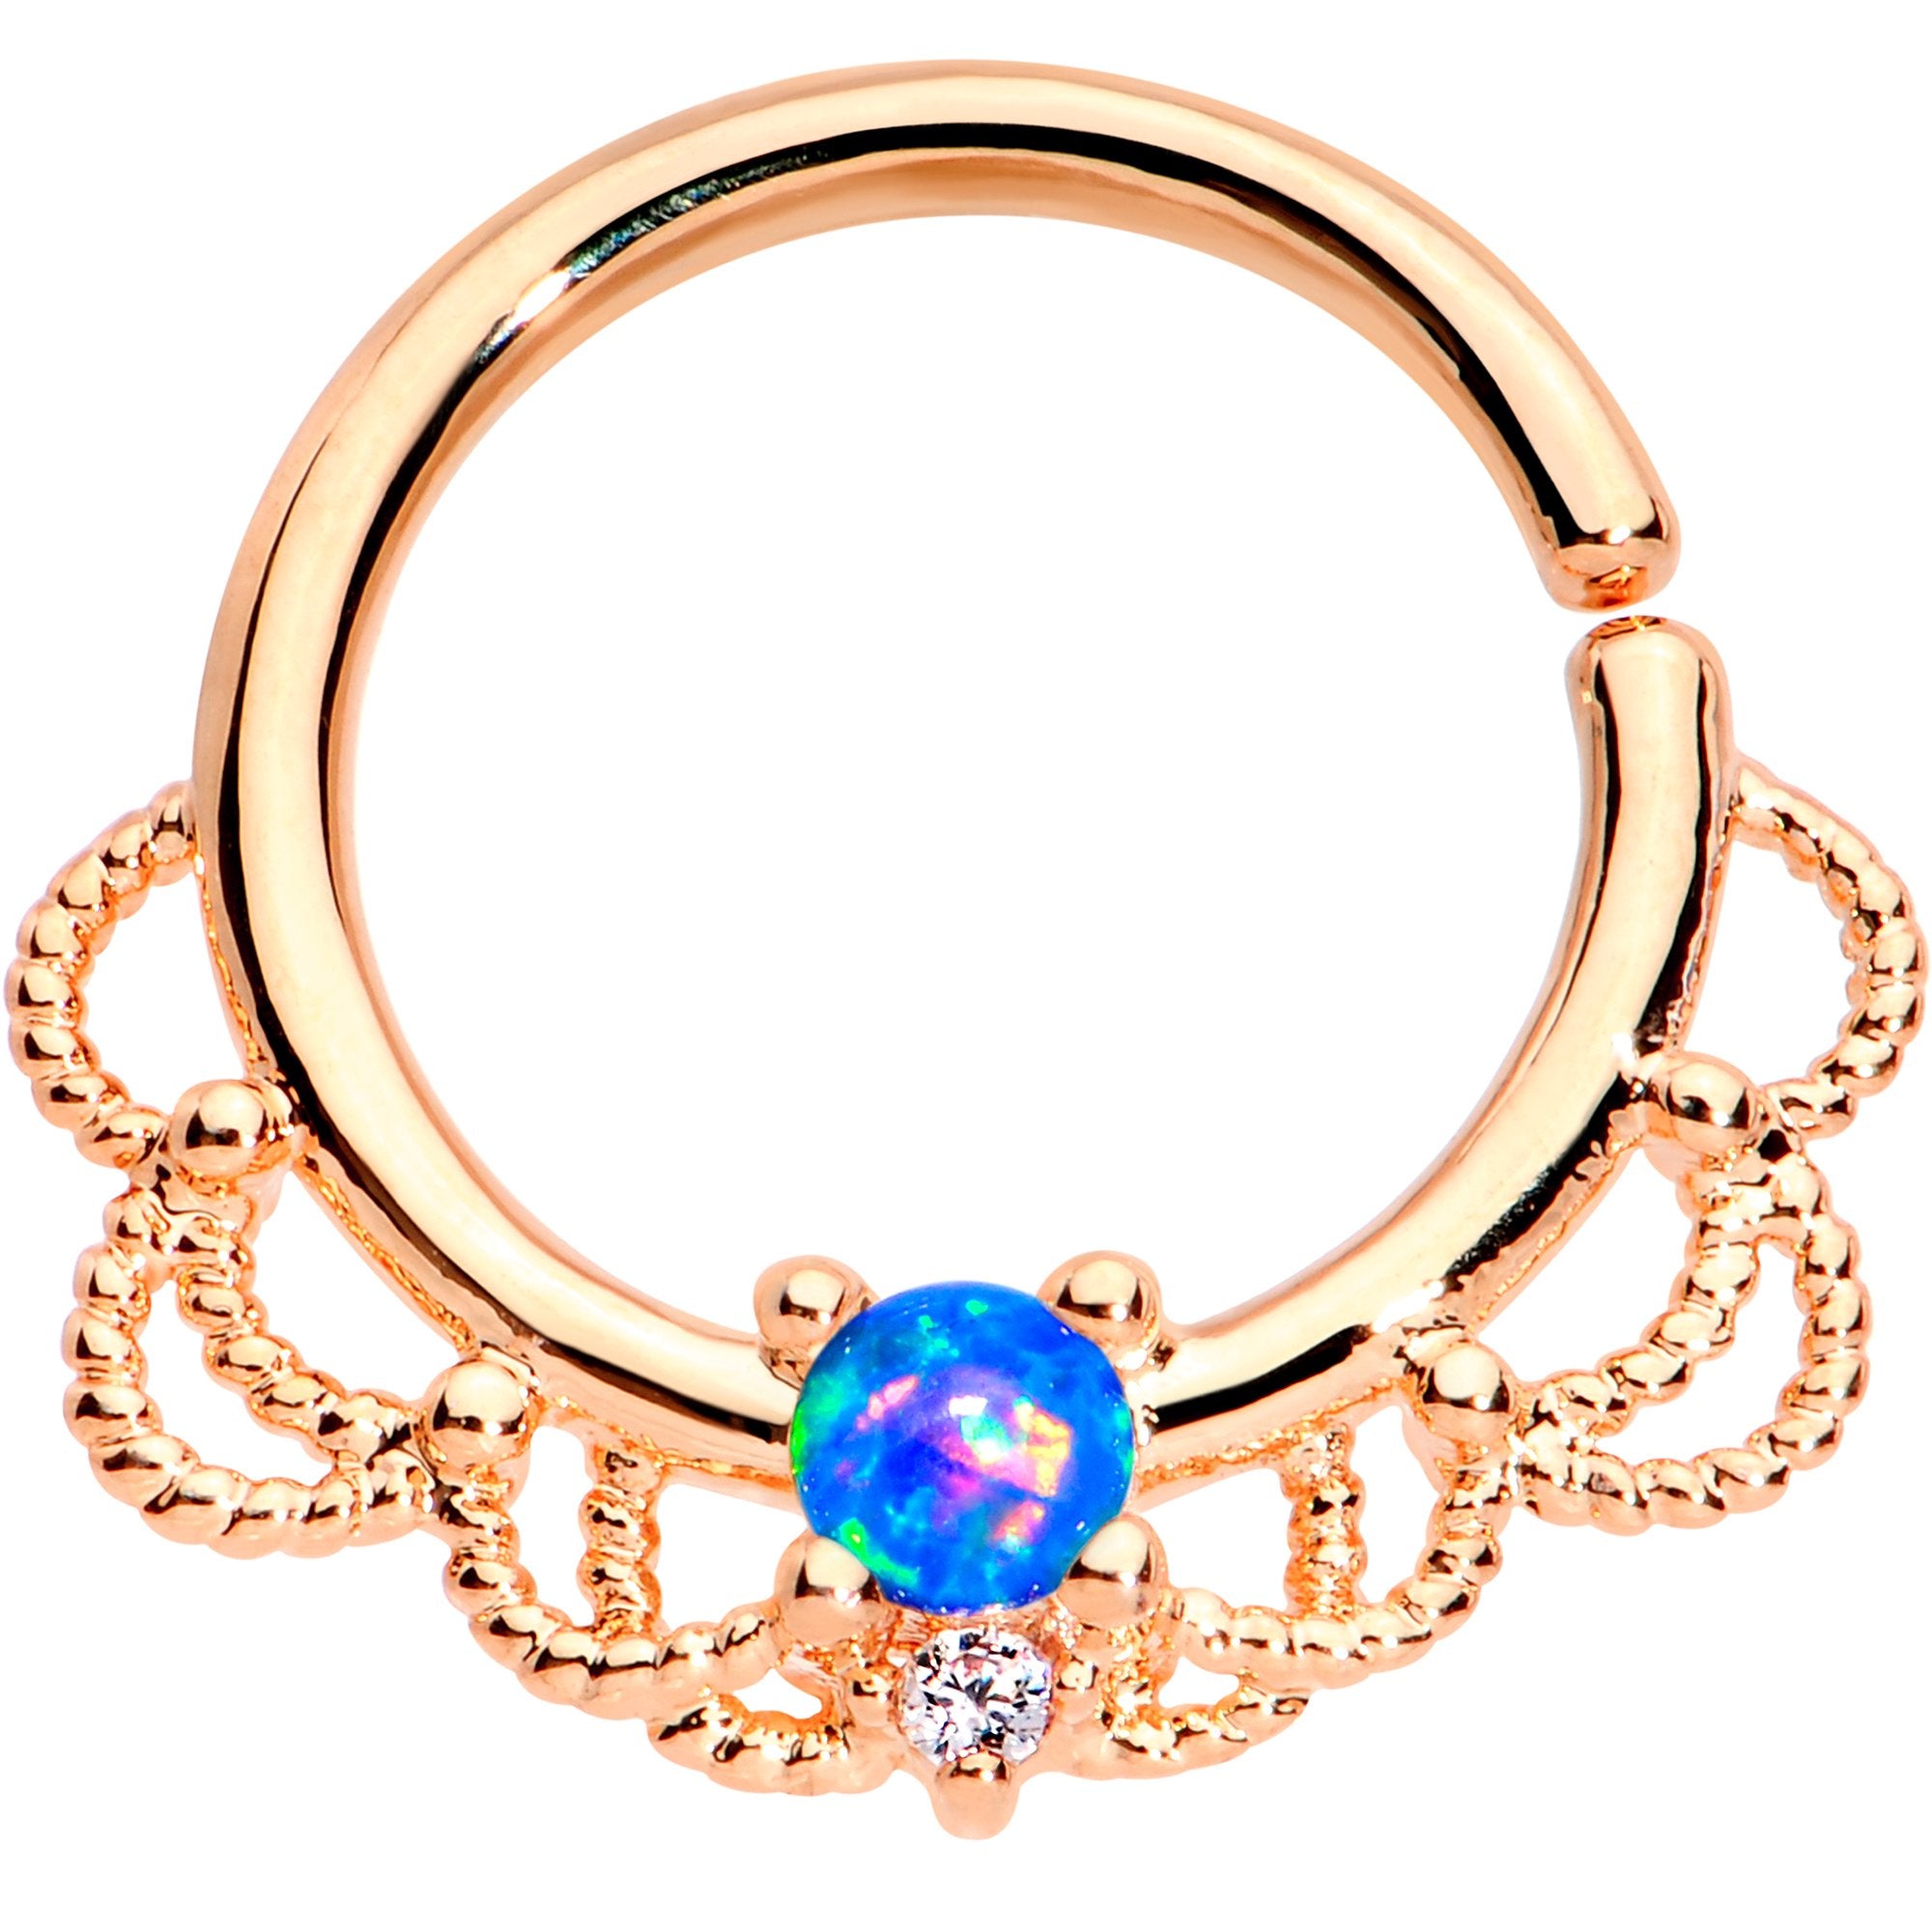 16 Gauge 5/16 Blue Faux Opal Rose Gold Plated Seamless Circular Ring